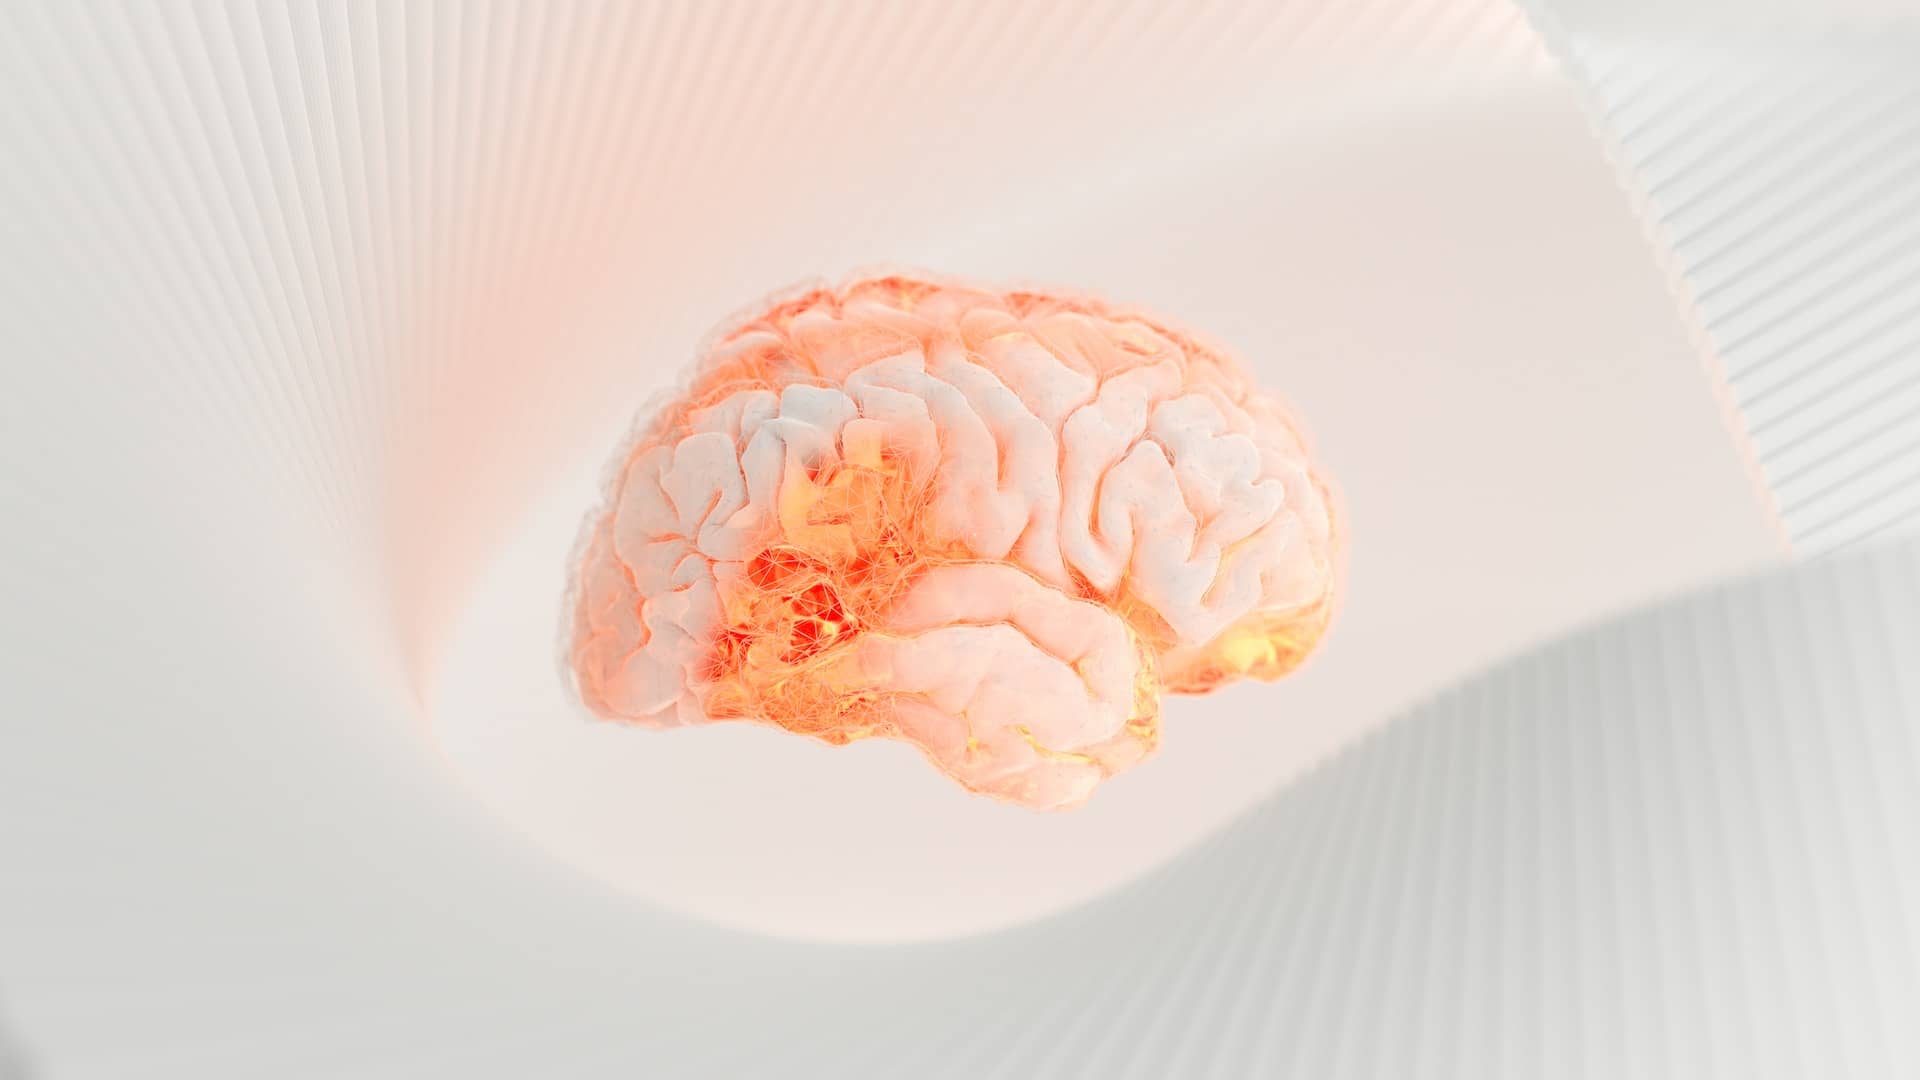 3D image of a brain